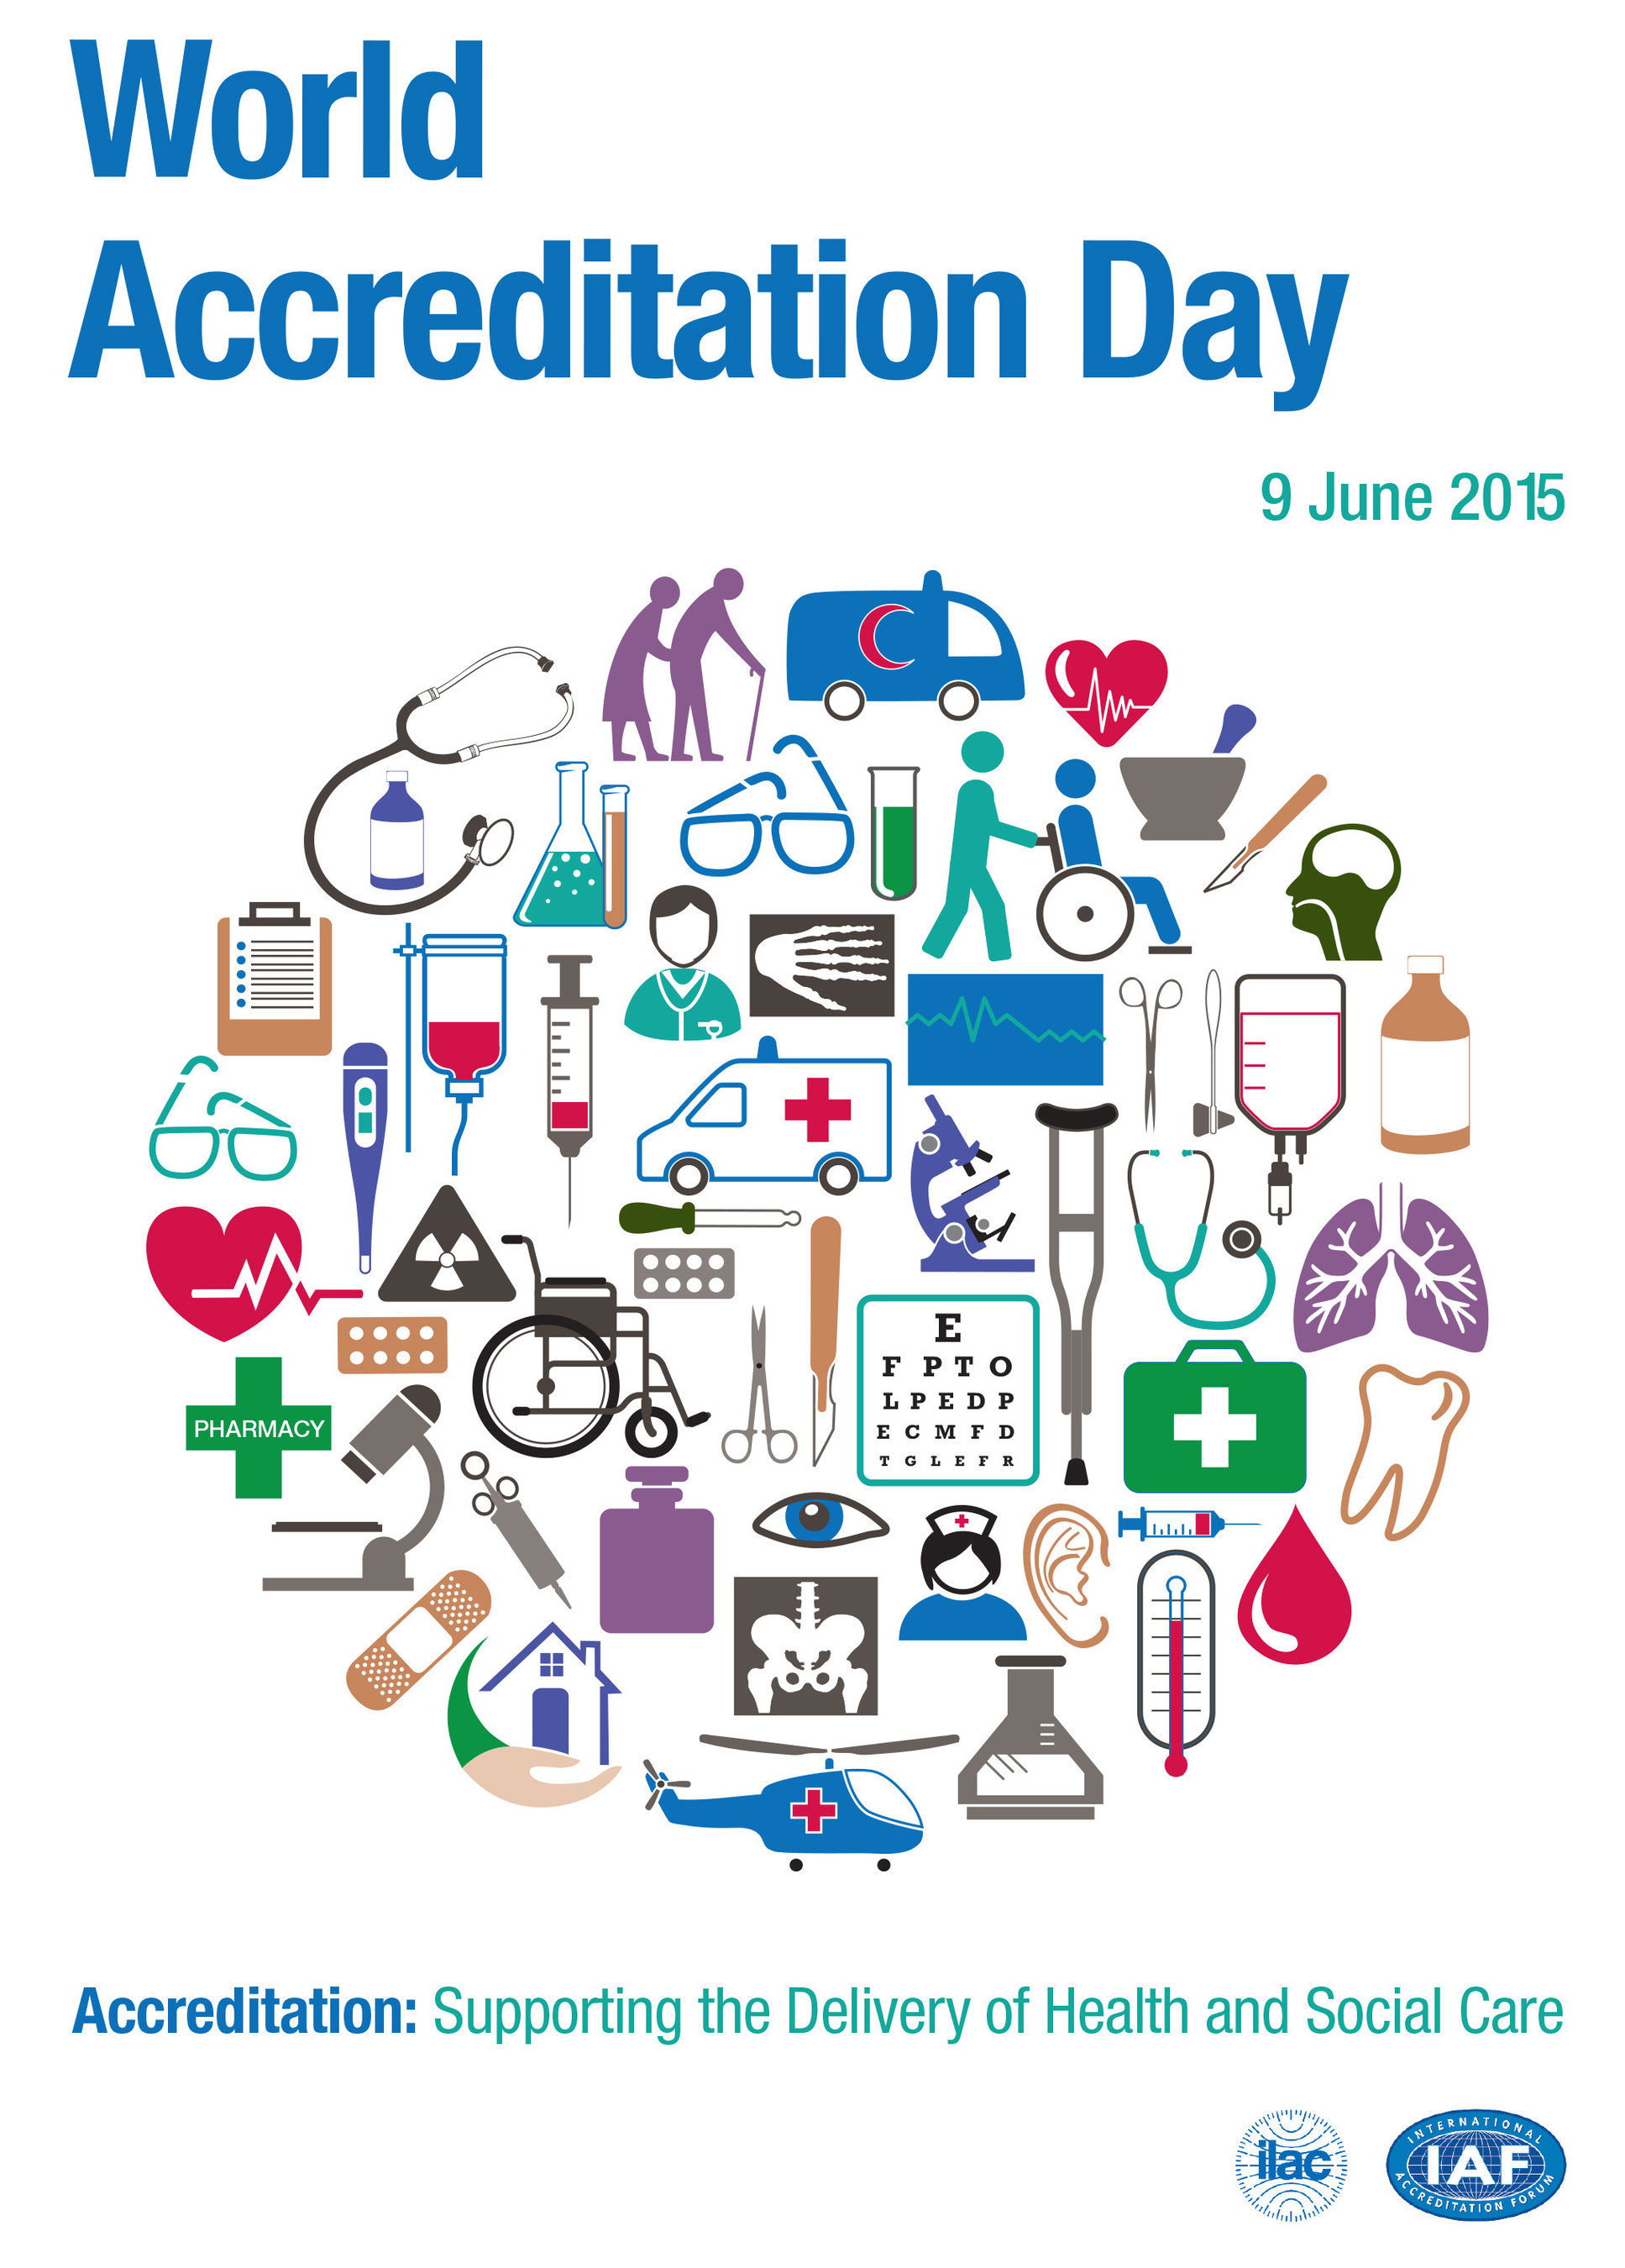 The U.S. will celebrate World Accreditation Day with a free webinar on June 9.